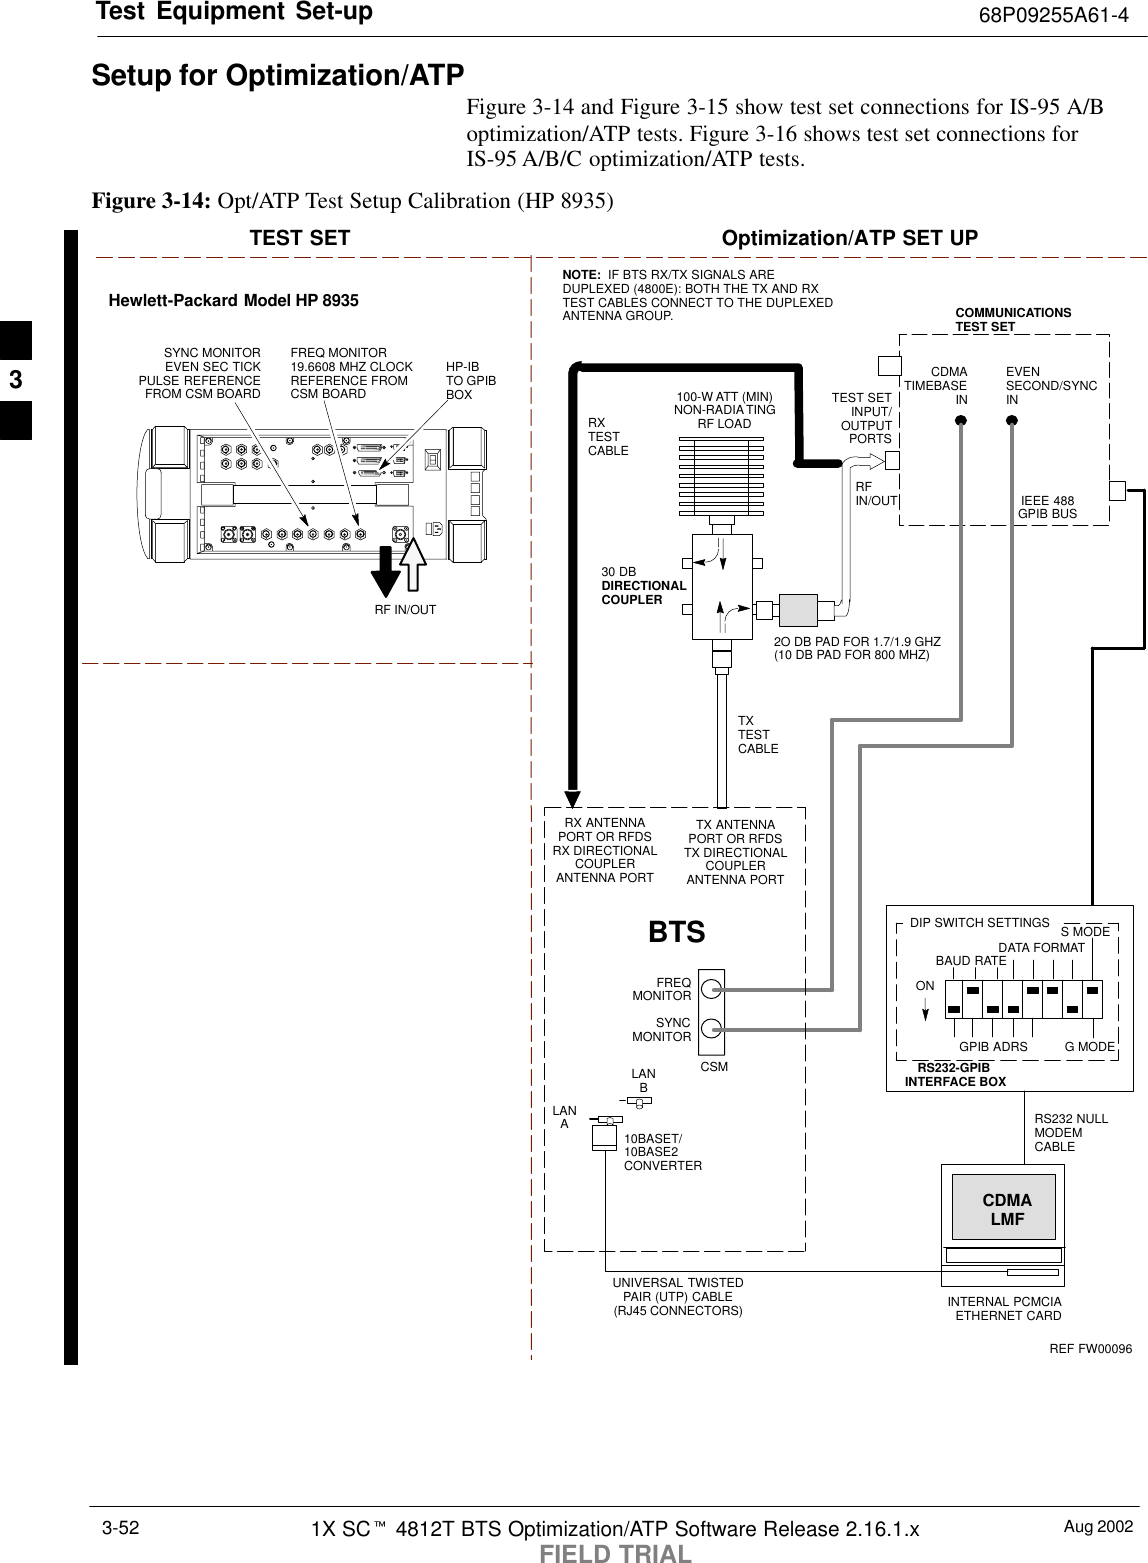 Test Equipment Set-up 68P09255A61-4Aug 20021X SCt 4812T BTS Optimization/ATP Software Release 2.16.1.xFIELD TRIAL3-52Setup for Optimization/ATPFigure 3-14 and Figure 3-15 show test set connections for IS-95 A/Boptimization/ATP tests. Figure 3-16 shows test set connections forIS-95 A/B/C optimization/ATP tests.Figure 3-14: Opt/ATP Test Setup Calibration (HP 8935)Hewlett-Packard Model HP 8935TEST SET Optimization/ATP SET UPRF IN/OUTHP-IBTO GPIBBOXSYNC MONITOREVEN SEC TICKPULSE REFERENCEFROM CSM BOARDFREQ MONITOR19.6608 MHZ CLOCKREFERENCE FROMCSM BOARDRX ANTENNAPORT OR RFDSRX DIRECTIONALCOUPLERANTENNA PORTTX ANTENNAPORT OR RFDSTX DIRECTIONALCOUPLERANTENNA PORTRS232 NULLMODEMCABLEBTSTXTESTCABLE10BASET/10BASE2CONVERTERLANBLANARXTESTCABLECOMMUNICATIONSTEST SETIEEE 488GPIB BUSRFIN/OUTTEST SETINPUT/OUTPUTPORTSNOTE:  IF BTS RX/TX SIGNALS AREDUPLEXED (4800E): BOTH THE TX AND RXTEST CABLES CONNECT TO THE DUPLEXEDANTENNA GROUP.100-W ATT (MIN)NON-RADIATINGRF LOAD2O DB PAD FOR 1.7/1.9 GHZ(10 DB PAD FOR 800 MHZ)EVENSECOND/SYNCINCDMATIMEBASE INFREQMONITORSYNCMONITORCSM30 DBDIRECTIONALCOUPLERRS232-GPIBINTERFACE BOXS MODEDATA FORMATBAUD RATEGPIB ADRS G MODEONDIP SWITCH SETTINGSINTERNAL PCMCIAETHERNET CARDUNIVERSAL TWISTEDPAIR (UTP) CABLE(RJ45 CONNECTORS)CDMALMFREF FW000963